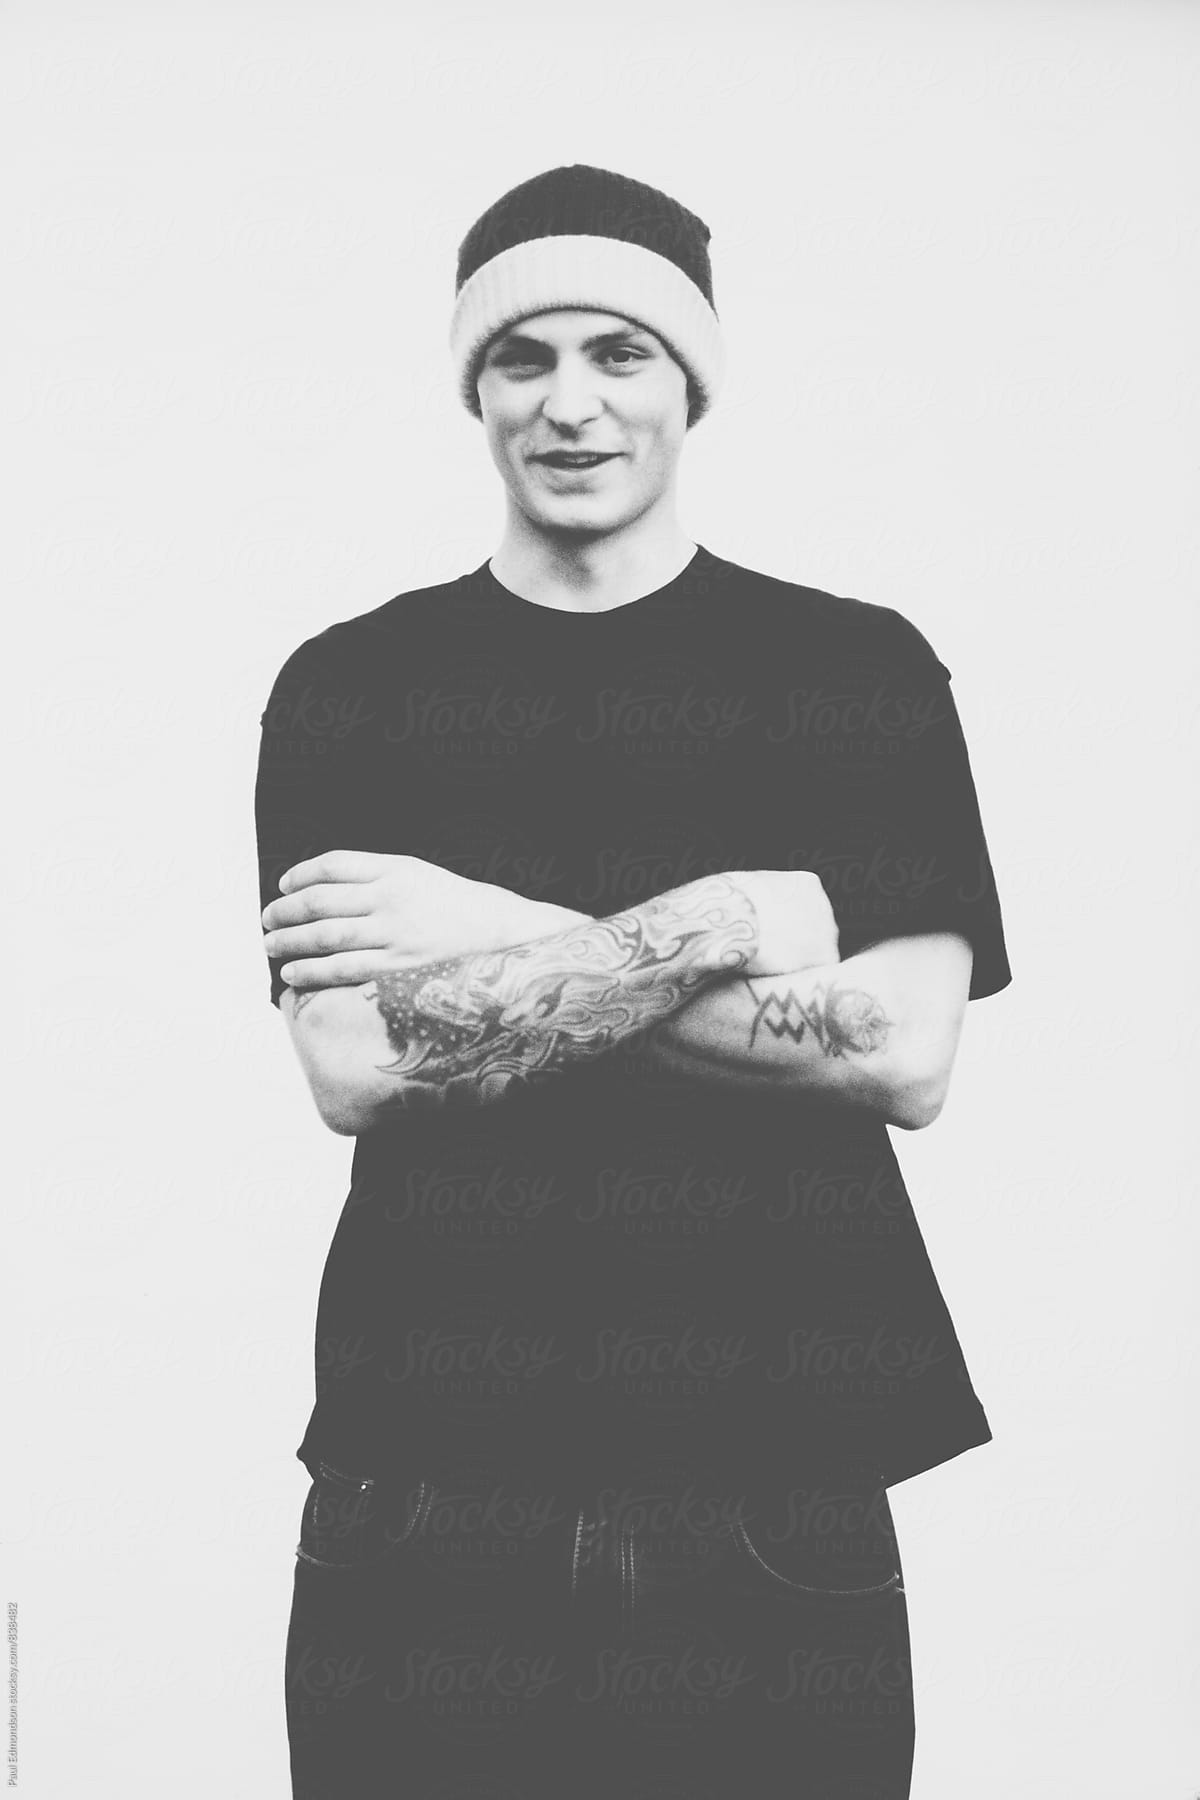 Portrait of young man with tattoos, wearing beanie cap